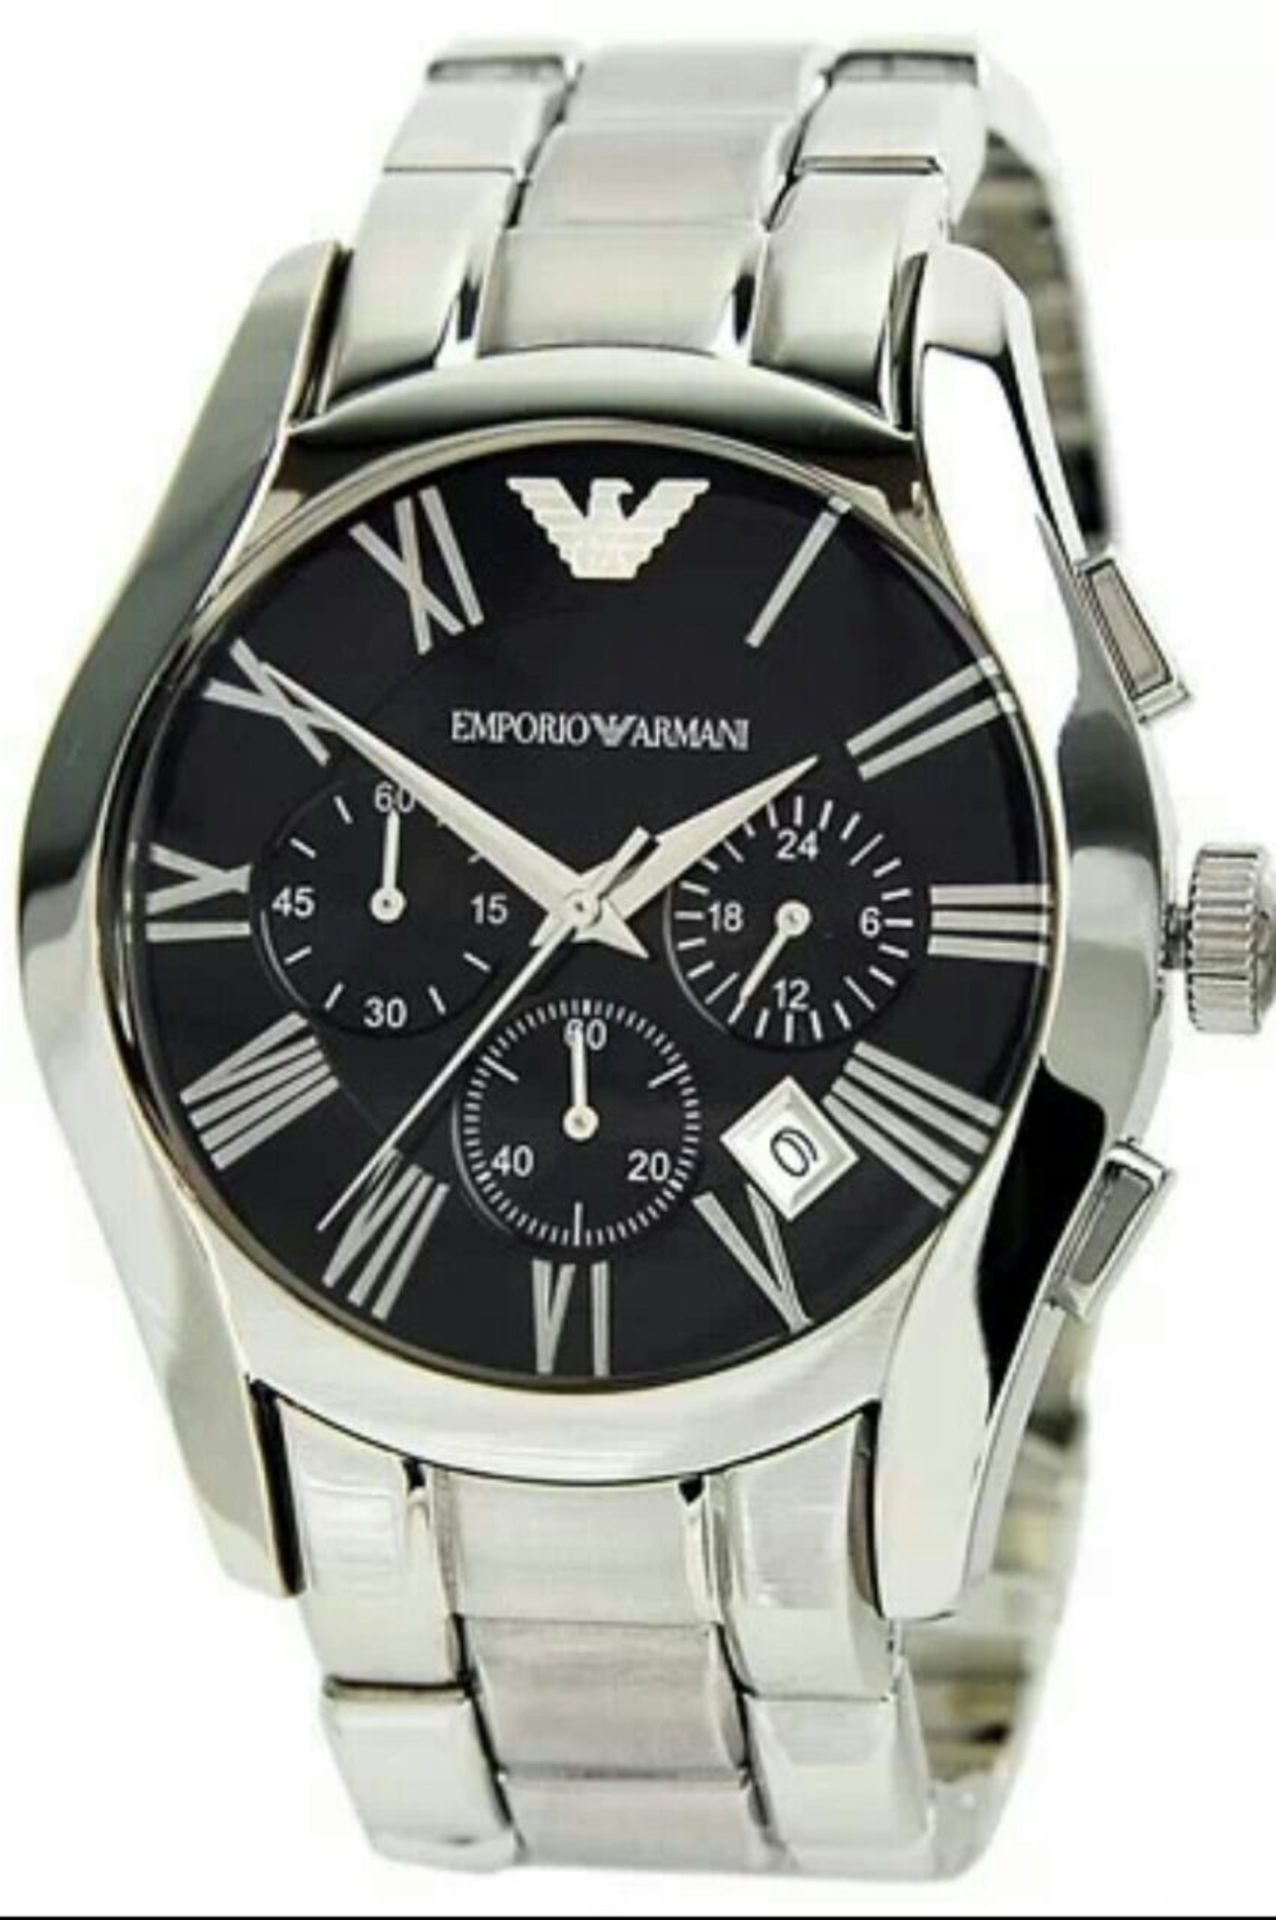 BRAND NEW GENTS EMPORIO ARMANI WATCH AR0673, COMPLETE WITH ORIGINAL PACKAGING AND MANUAL - FREE